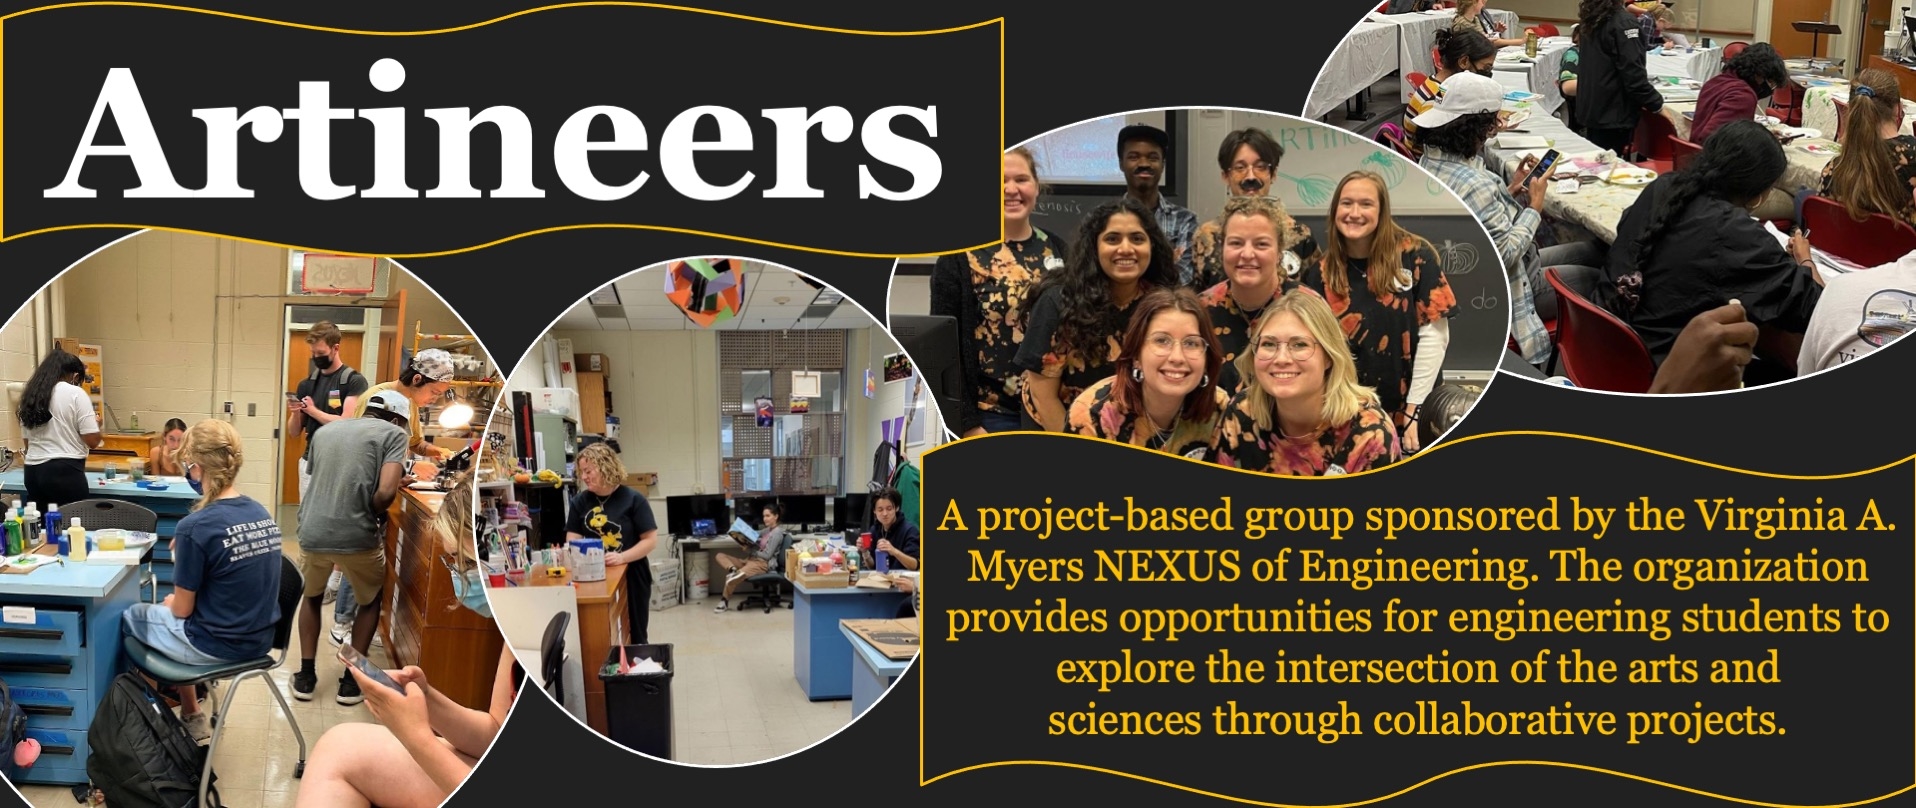 Artineers; A project-based group sponsored by the Virginia A. Myers NEXUS of Engineering. The organization provides opportunities for engineering students to explore the intersection of the arts and sciences through collaborative projects.